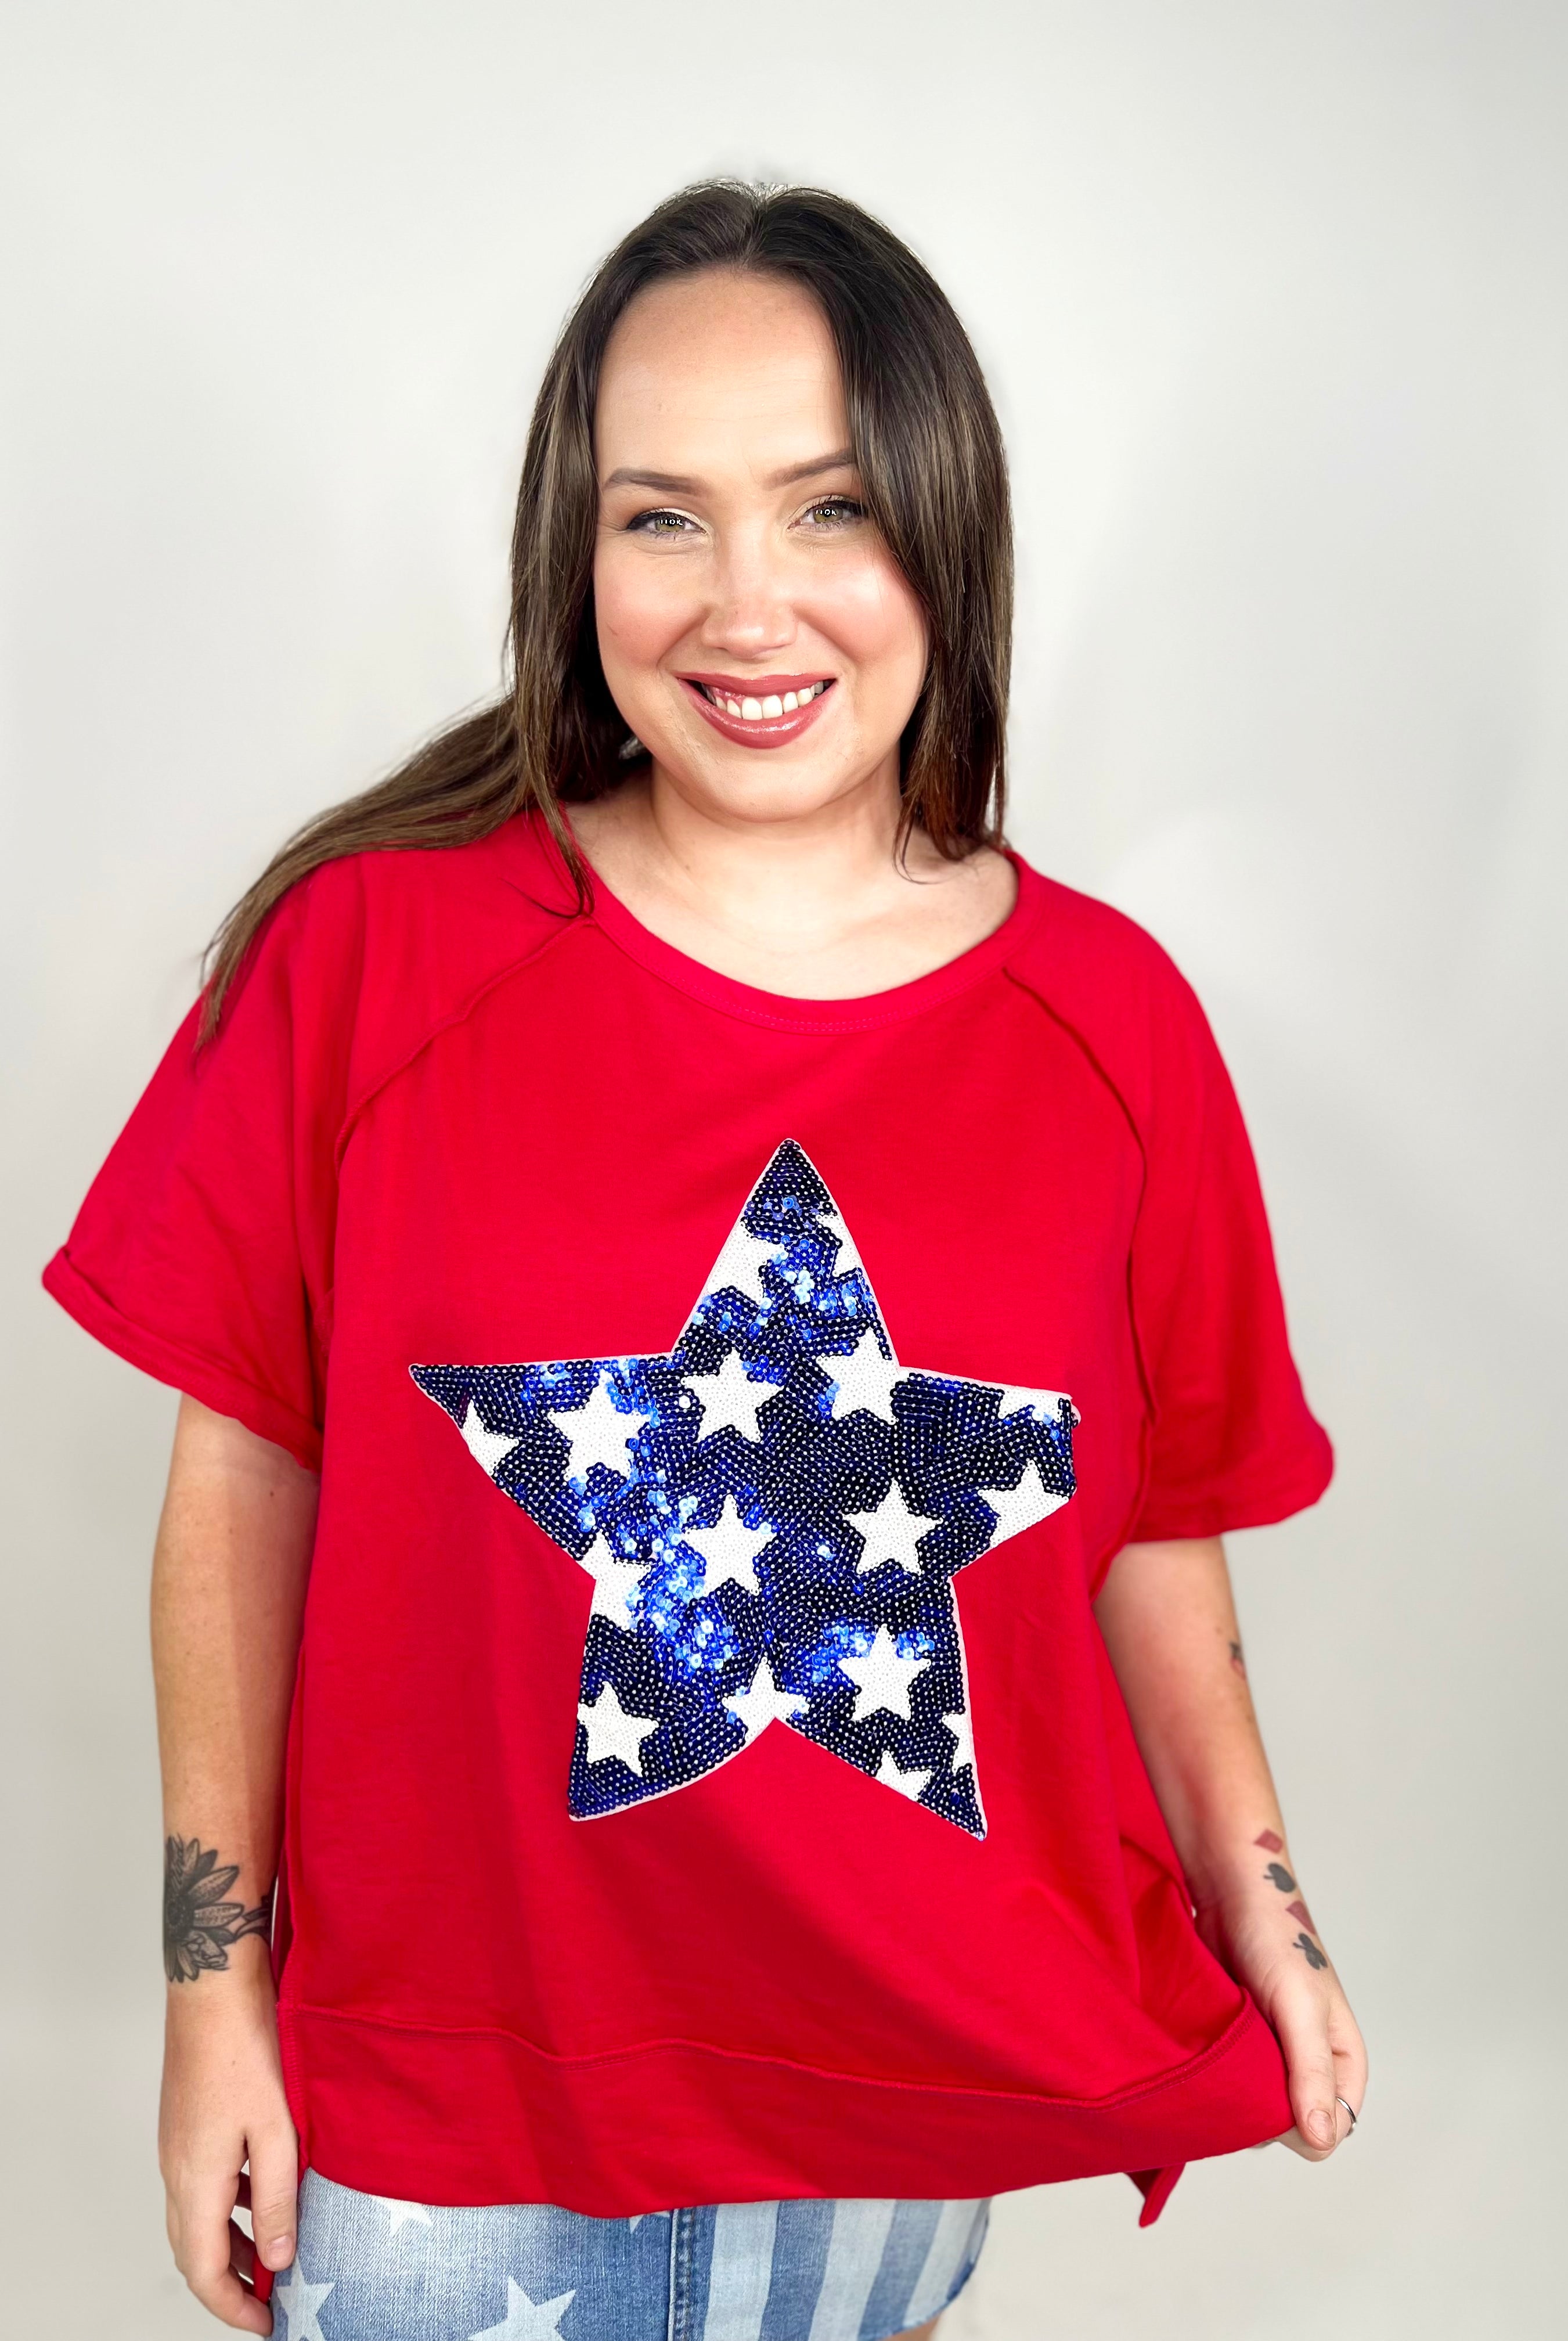 Stars and Sequins Top-110 Short Sleeve Top-Bibi-Heathered Boho Boutique, Women's Fashion and Accessories in Palmetto, FL